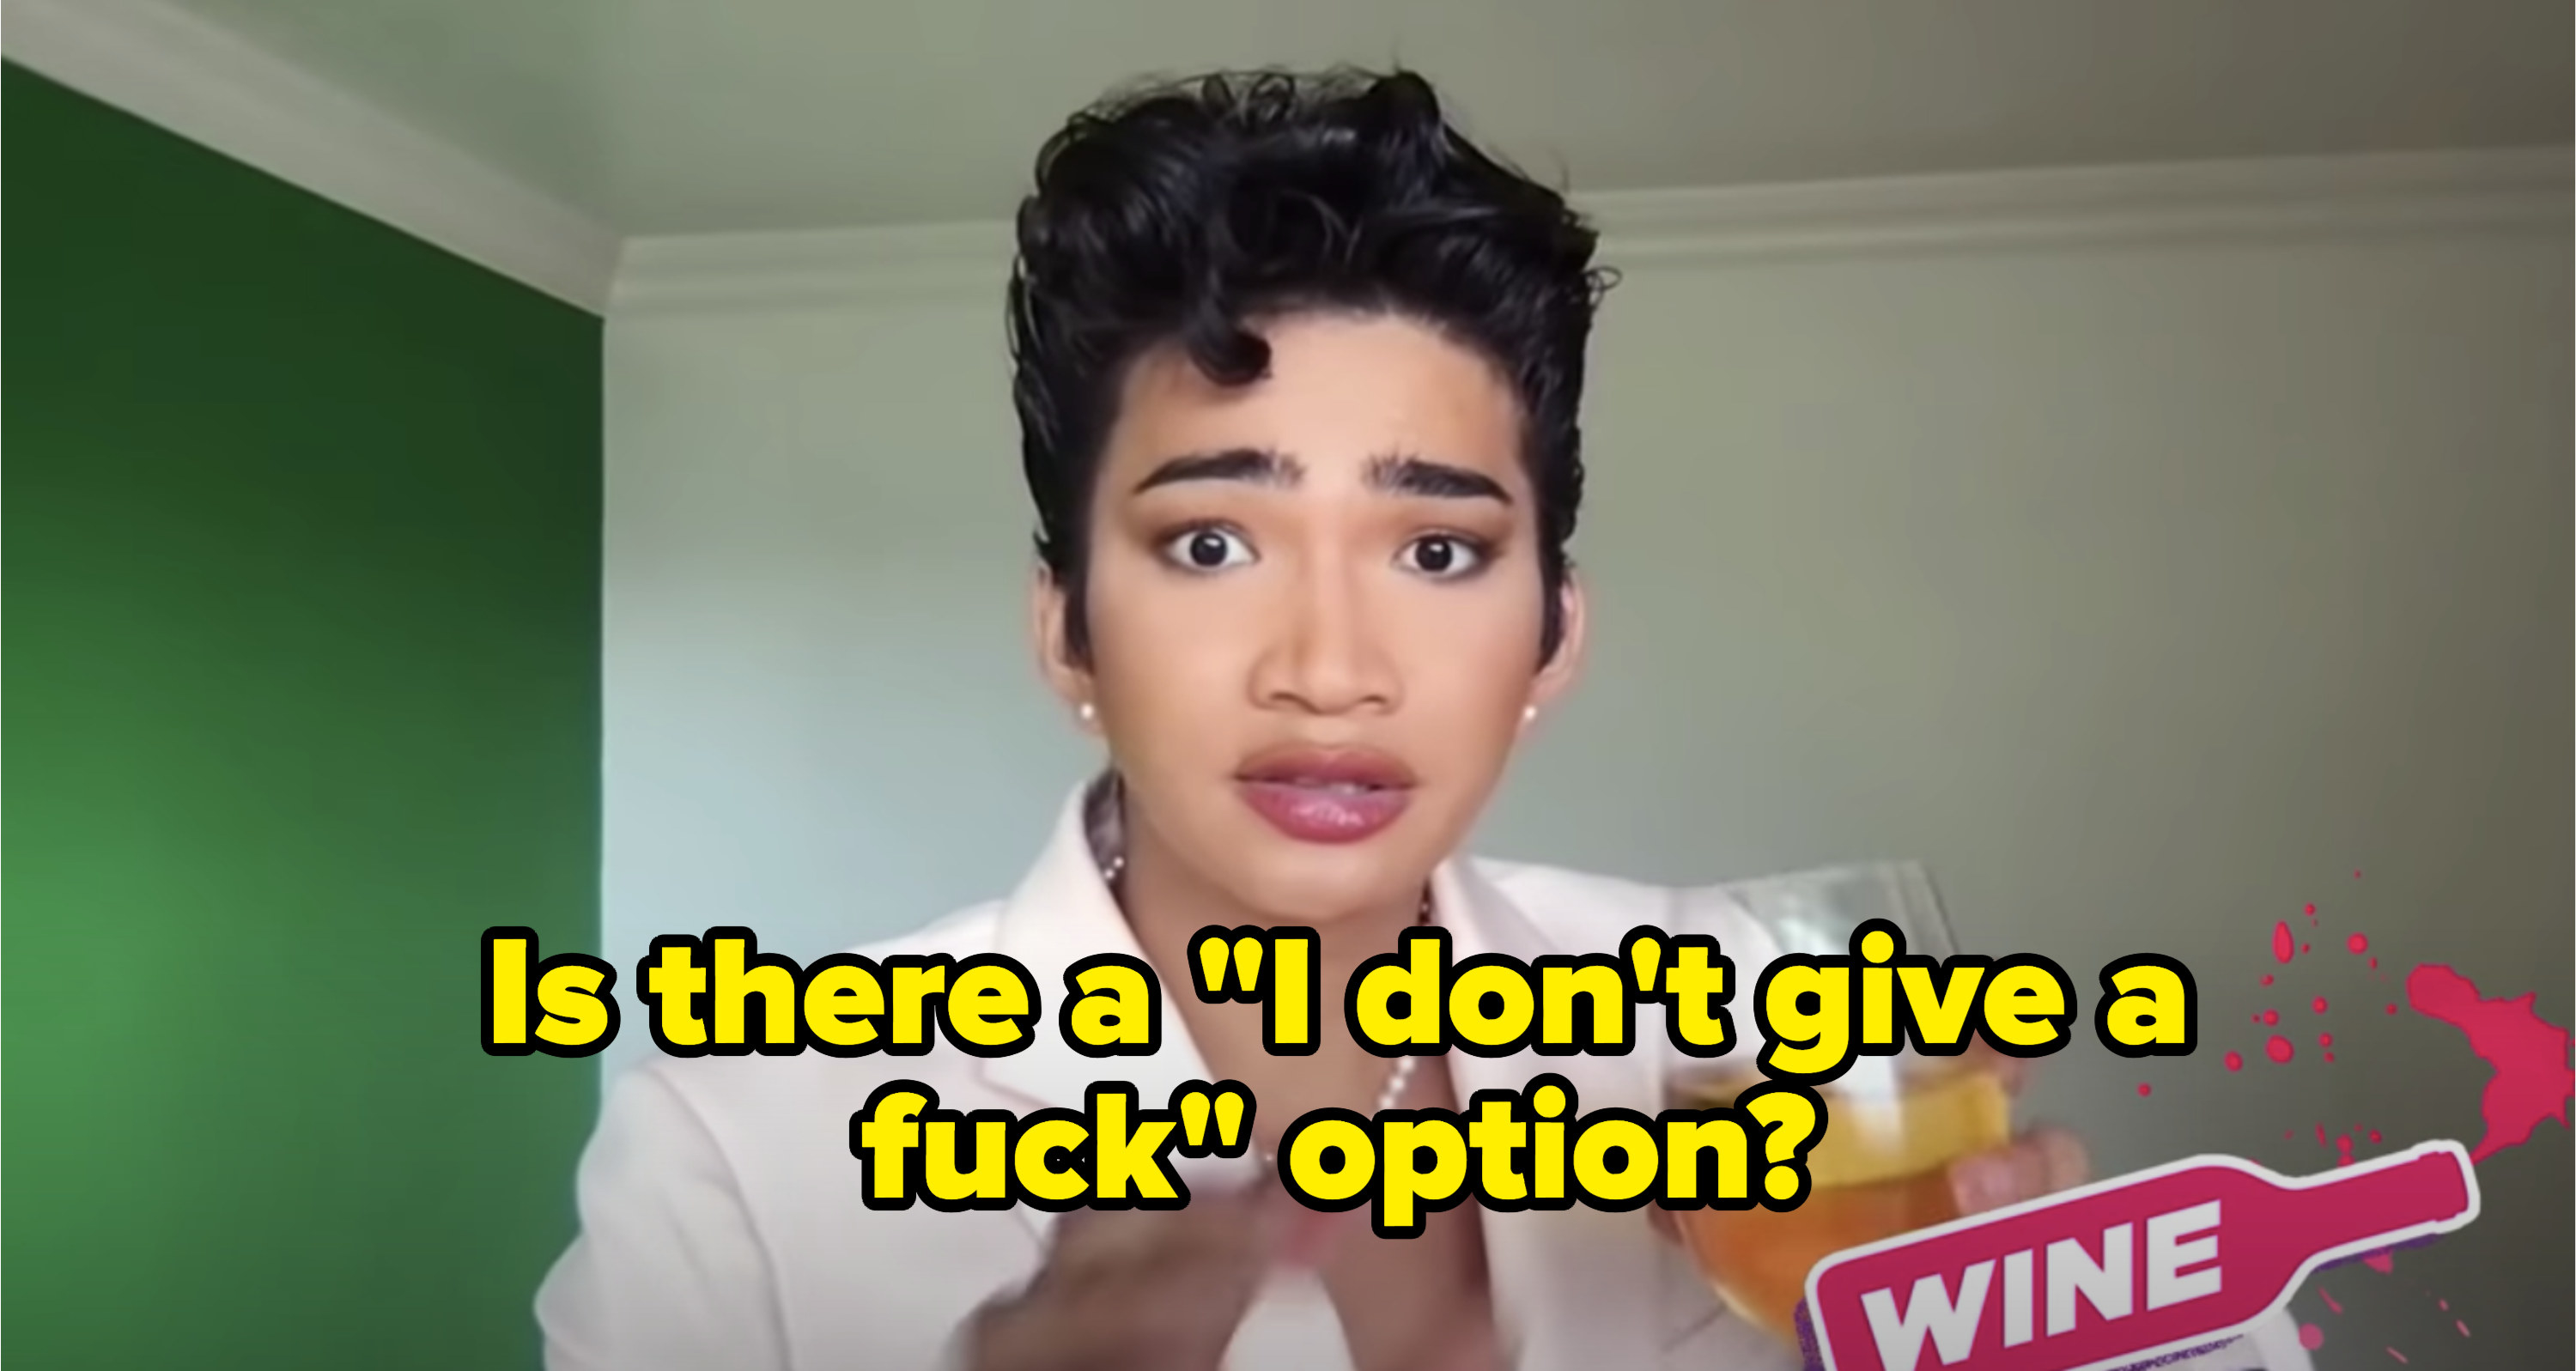 Bretman saying, &quot;Is there a &#x27;I don&#x27;t give a fuck&#x27; option?&quot;